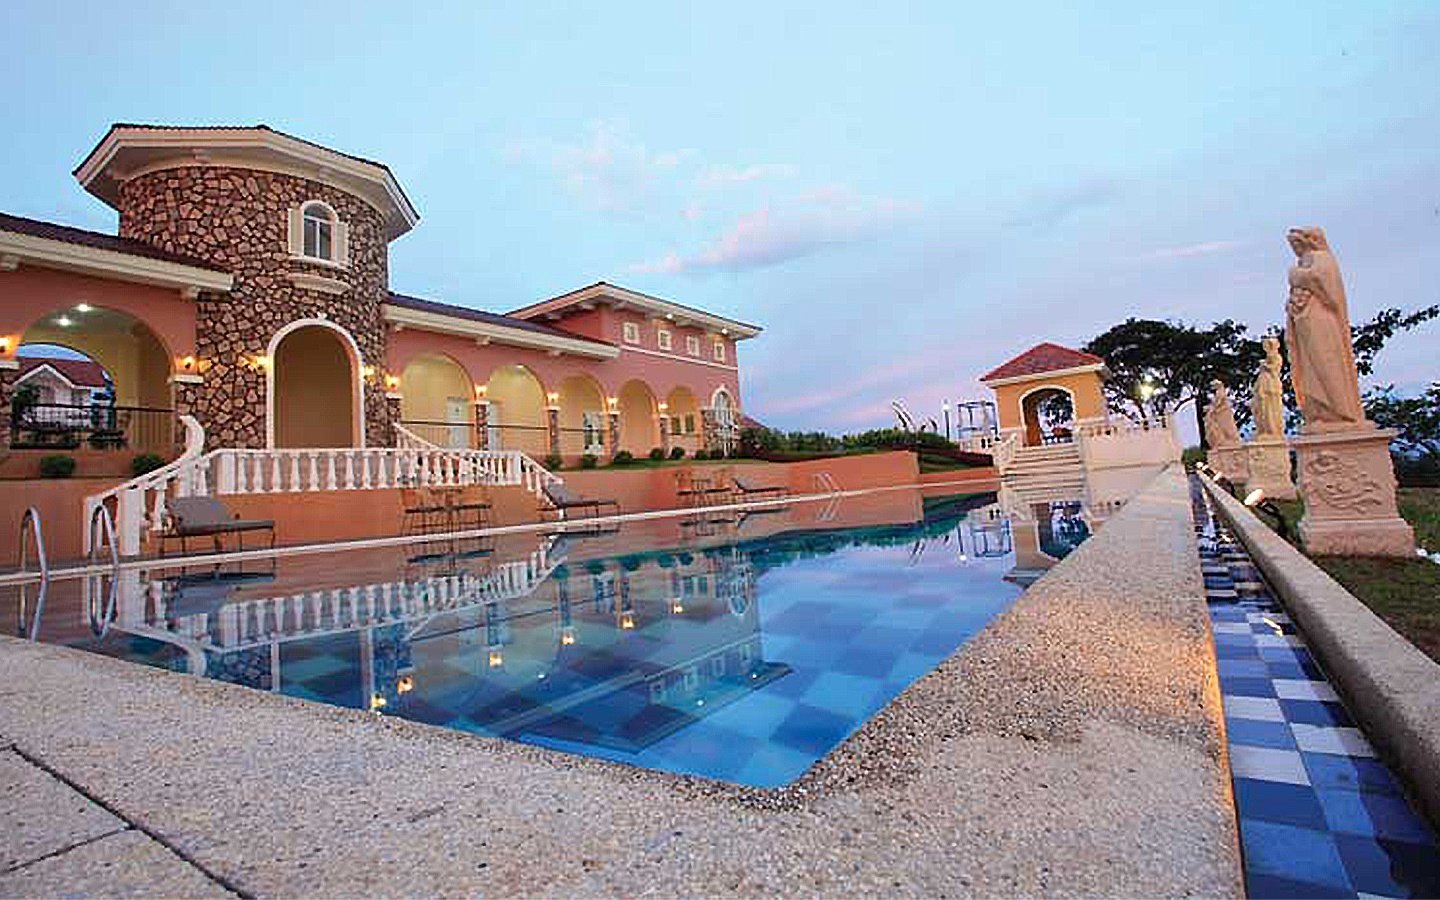 Camella Riverfront clubhouse and swimming pool